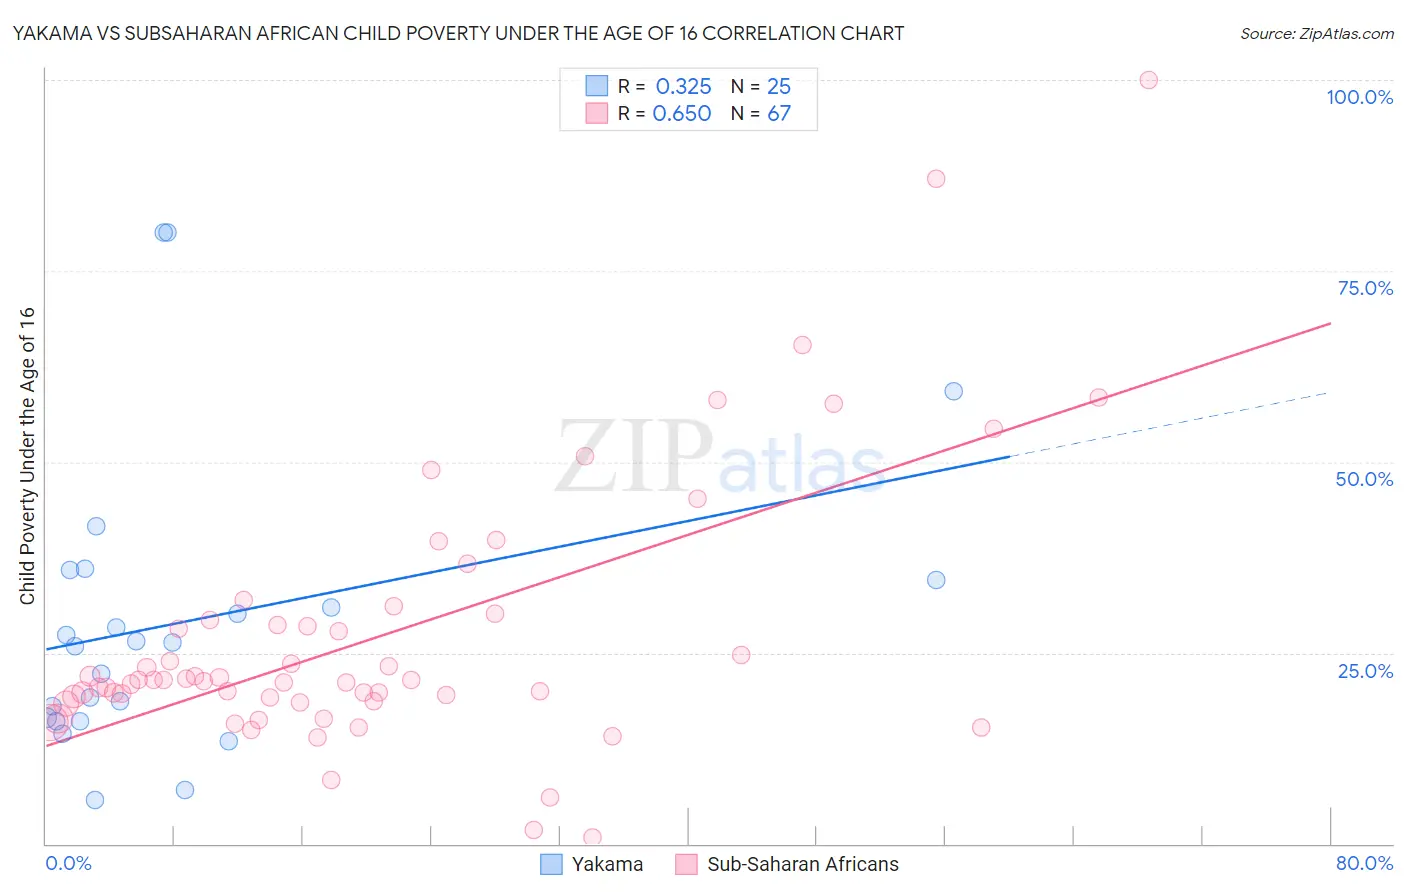 Yakama vs Subsaharan African Child Poverty Under the Age of 16